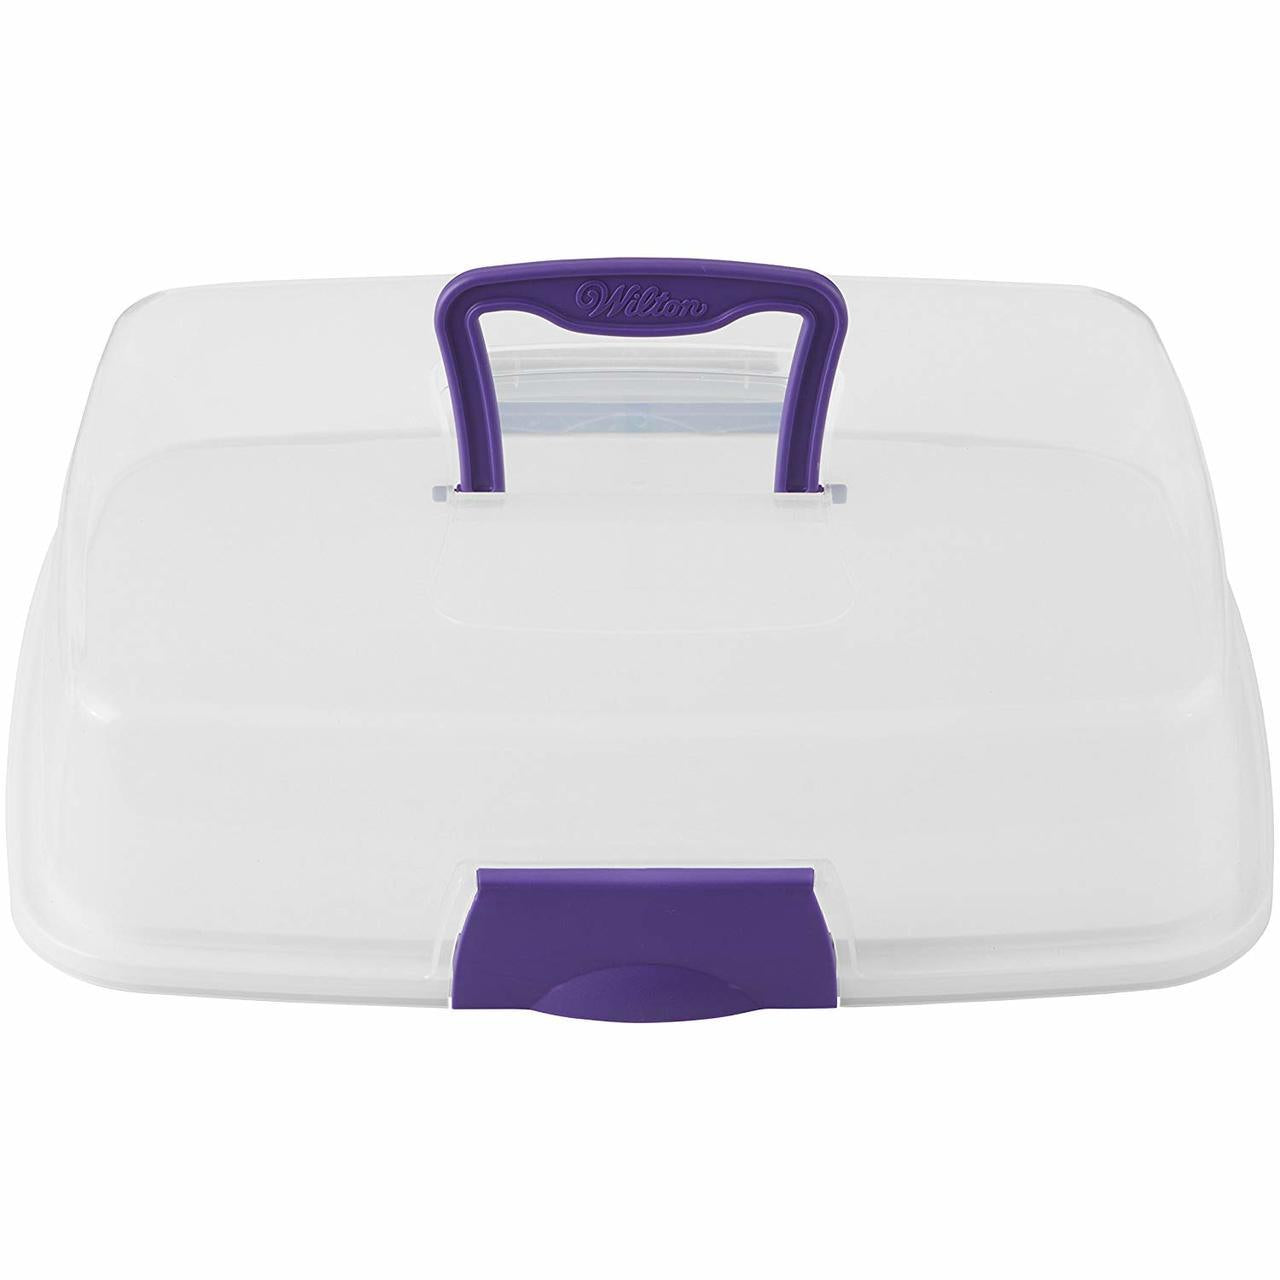 WILTON 2 IN 1 REVERSIBLE RECTANGLE CUPCAKE AND CAKE CARRIER CADDY